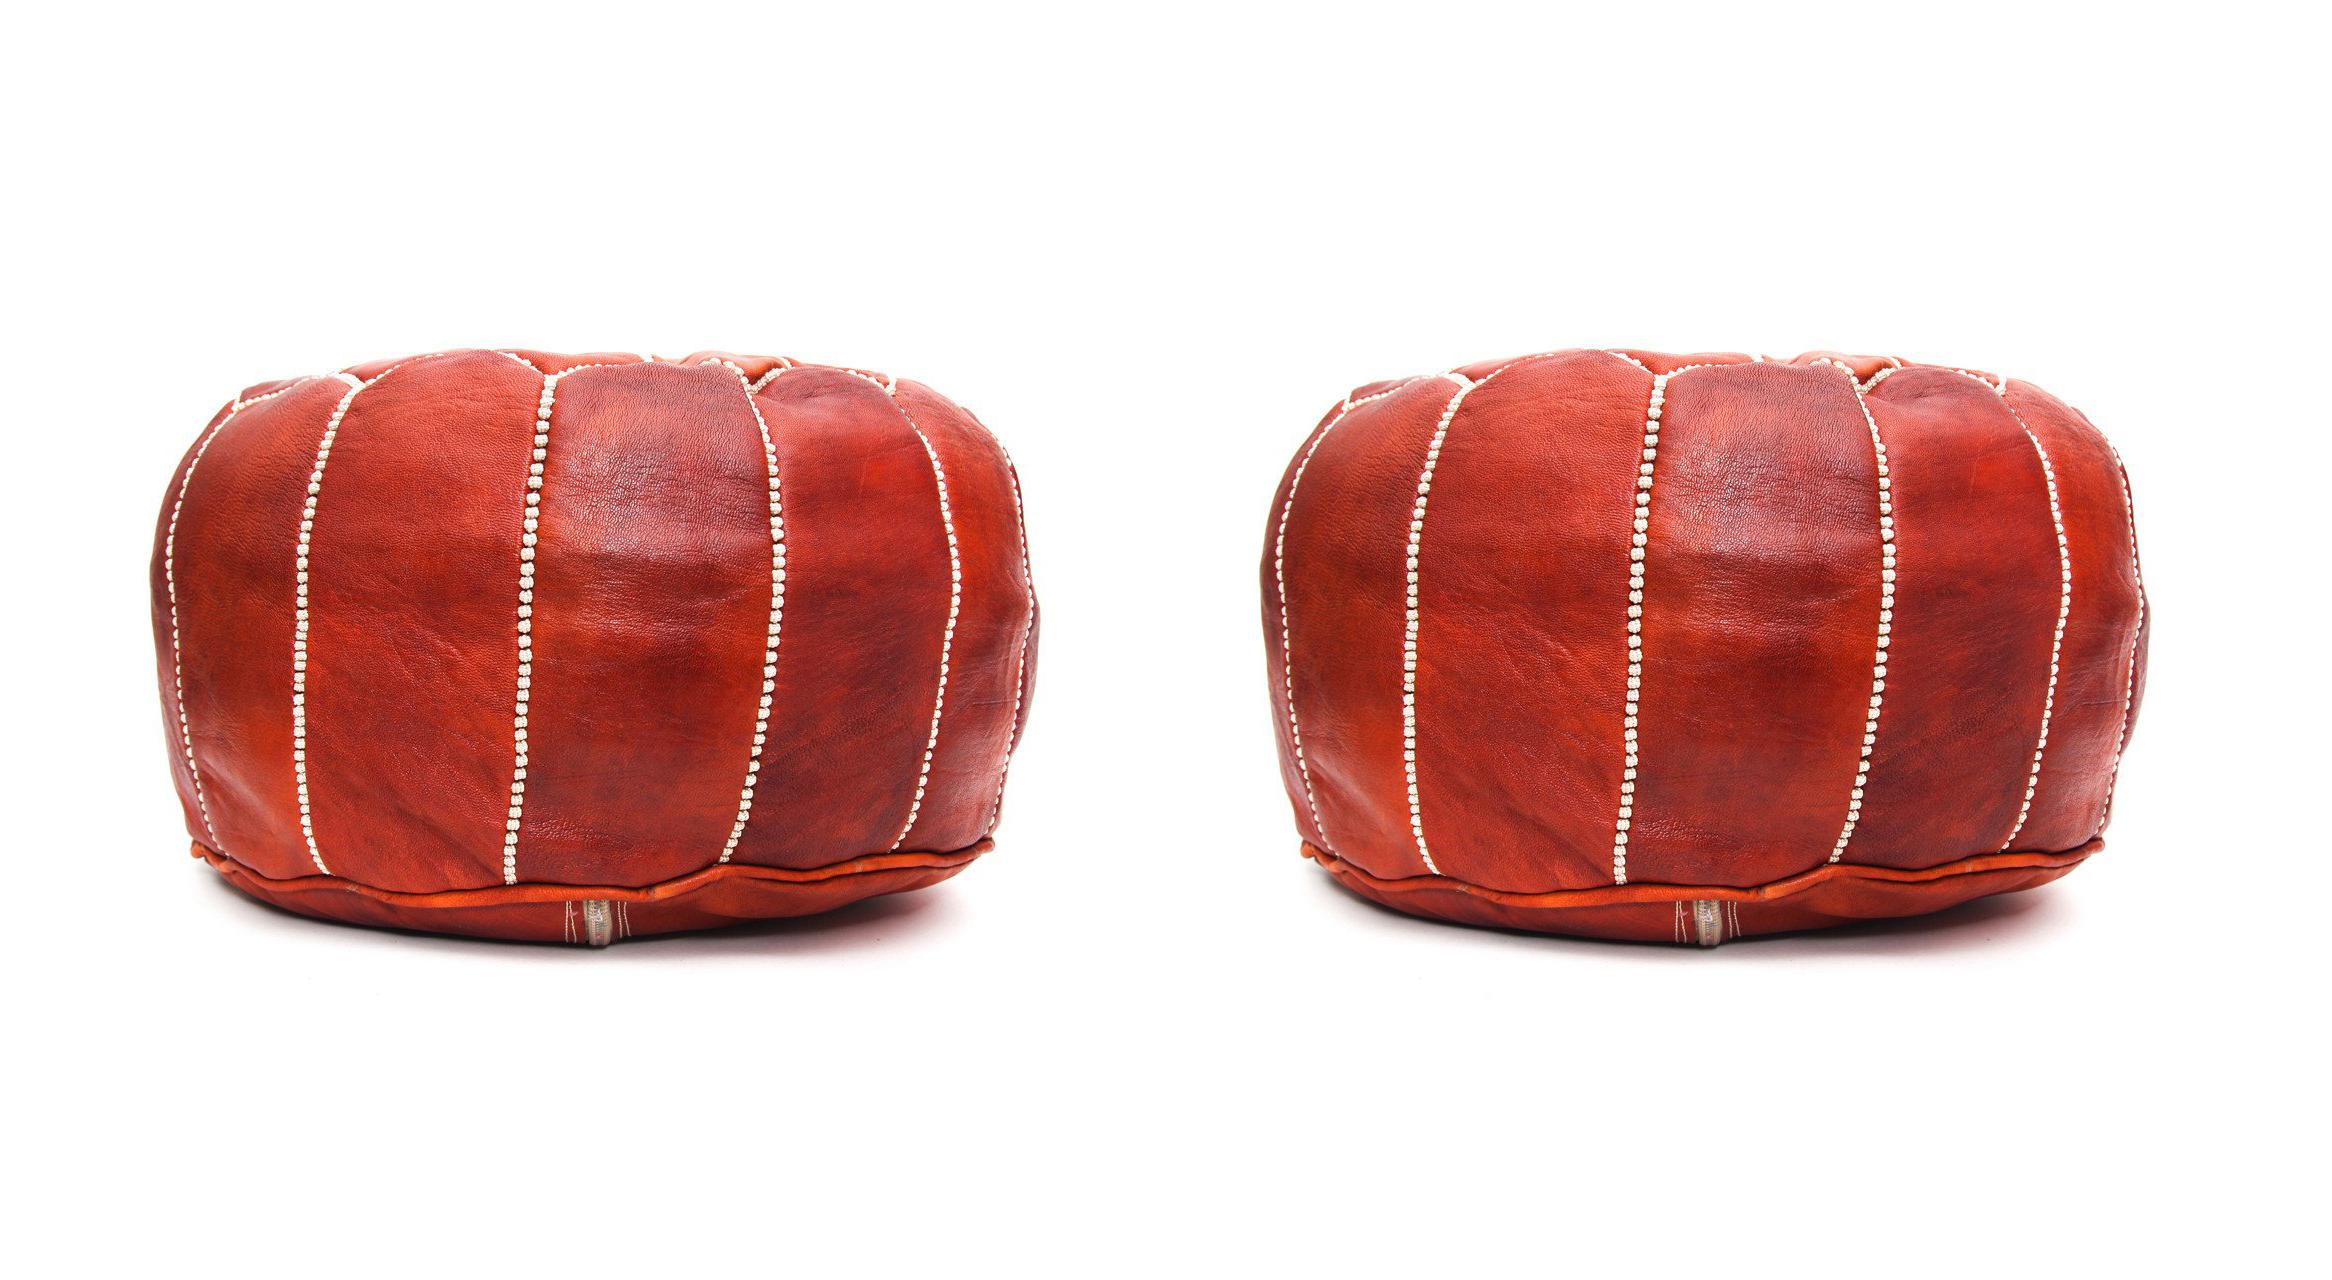 This eye-catching handstitched genuine dark leather pair of Moroccan Poufs will lend an air of regal majesty to your den or living room. Handcrafted in leather by master artisans and boasting a resplendent arabesque pattern, this pair of poufs is